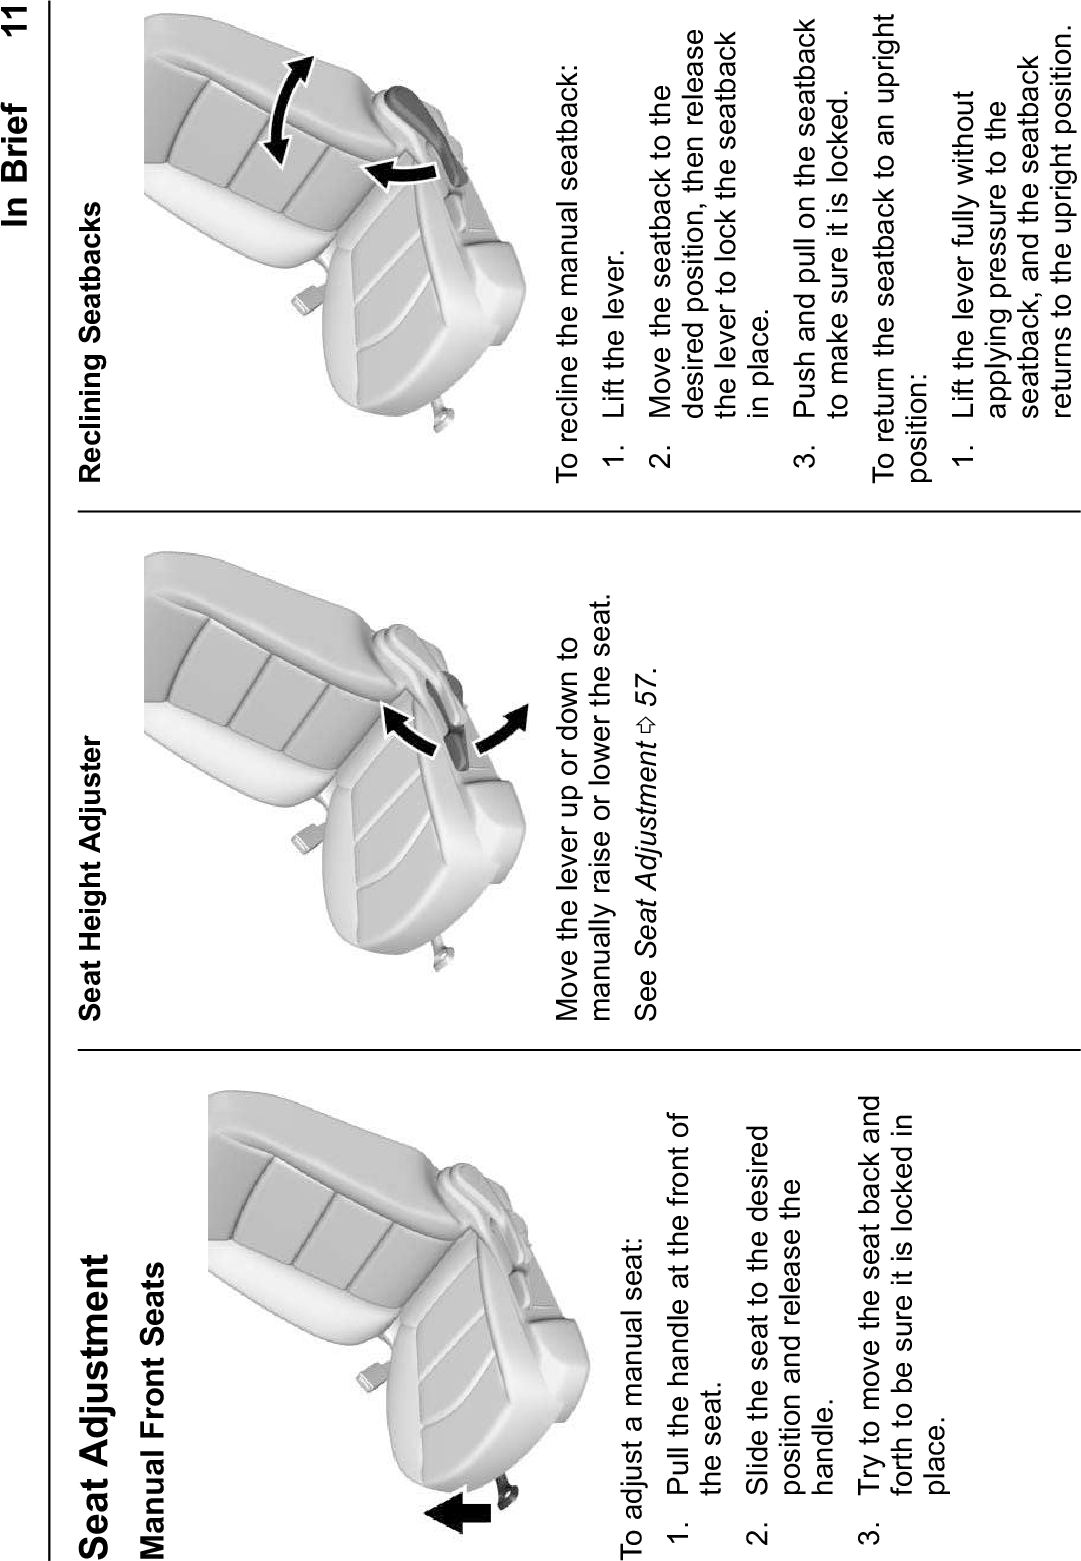 In Brief 11Seat AdjustmentManual Front SeatsTo adjust a manual seat:1. Pull the handle at the front ofthe seat.2. Slide the seat to the desiredposition and release thehandle.3. Try to move the seat back andforth to be sure it is locked inplace.Seat Height AdjusterMove the lever up or down tomanually raise or lower the seat.See Seat Adjustment 057.Reclining SeatbacksTo recline the manual seatback:1. Lift the lever.2. Move the seatback to thedesired position, then releasethe lever to lock the seatbackin place.3. Push and pull on the seatbackto make sure it is locked.To return the seatback to an uprightposition:1. Lift the lever fully withoutapplying pressure to theseatback, and the seatbackreturns to the upright position.